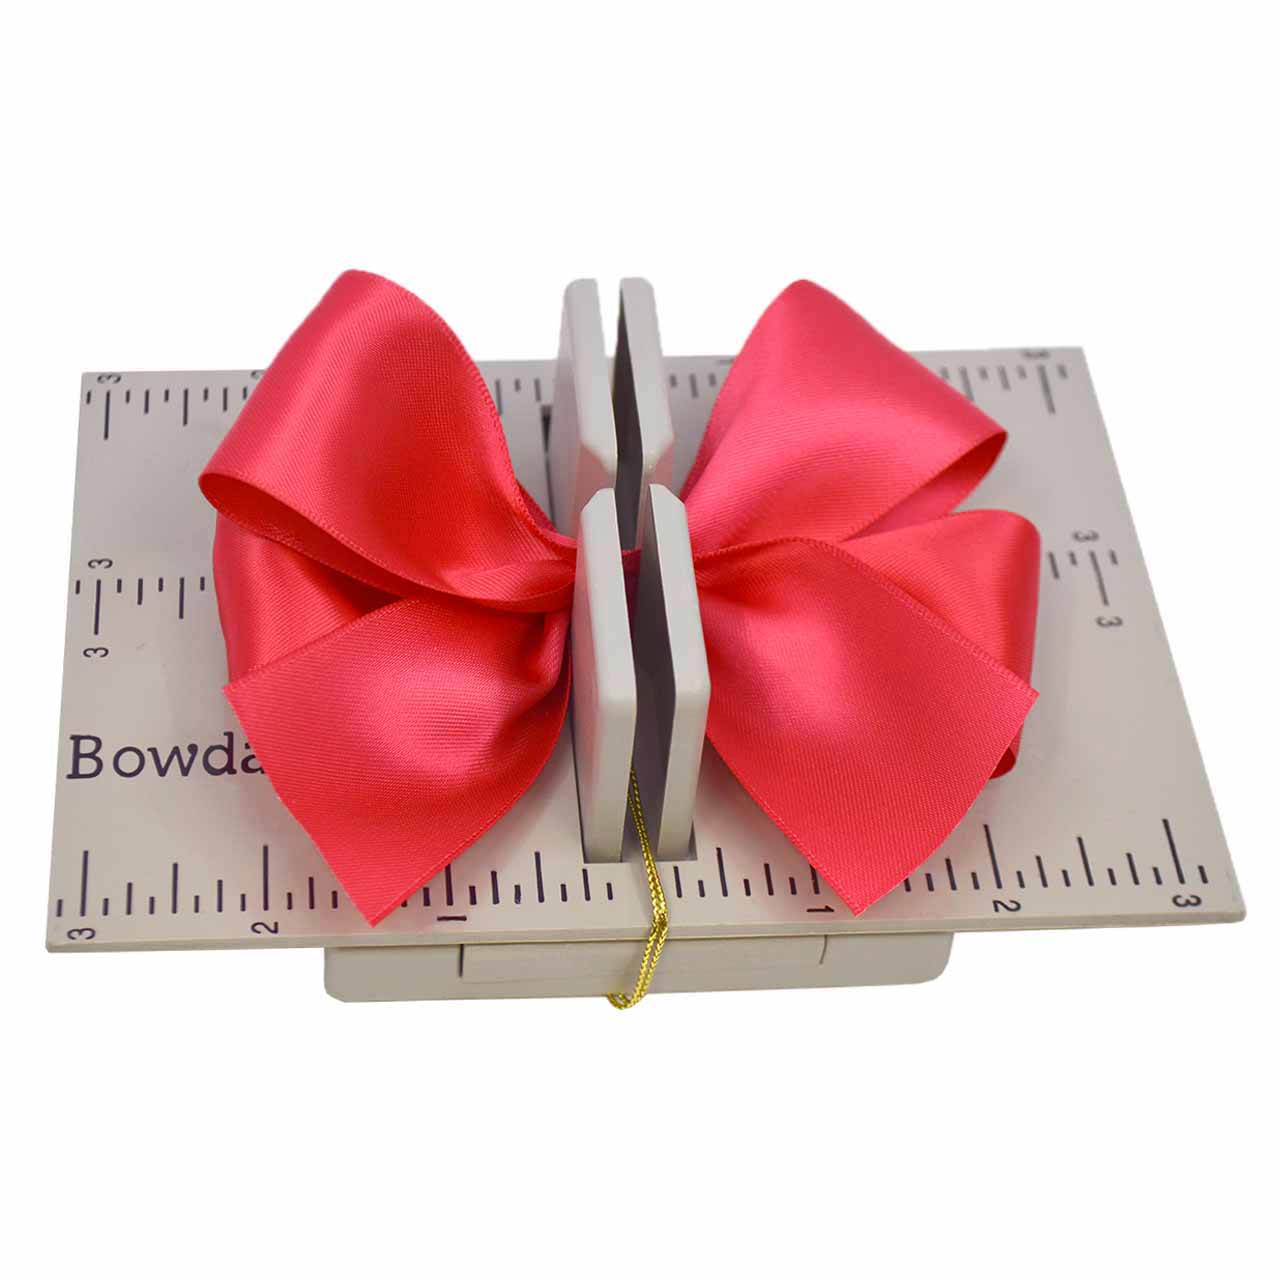 Here is a short video on how to use a Bowdabra Bow maker #bowdabra